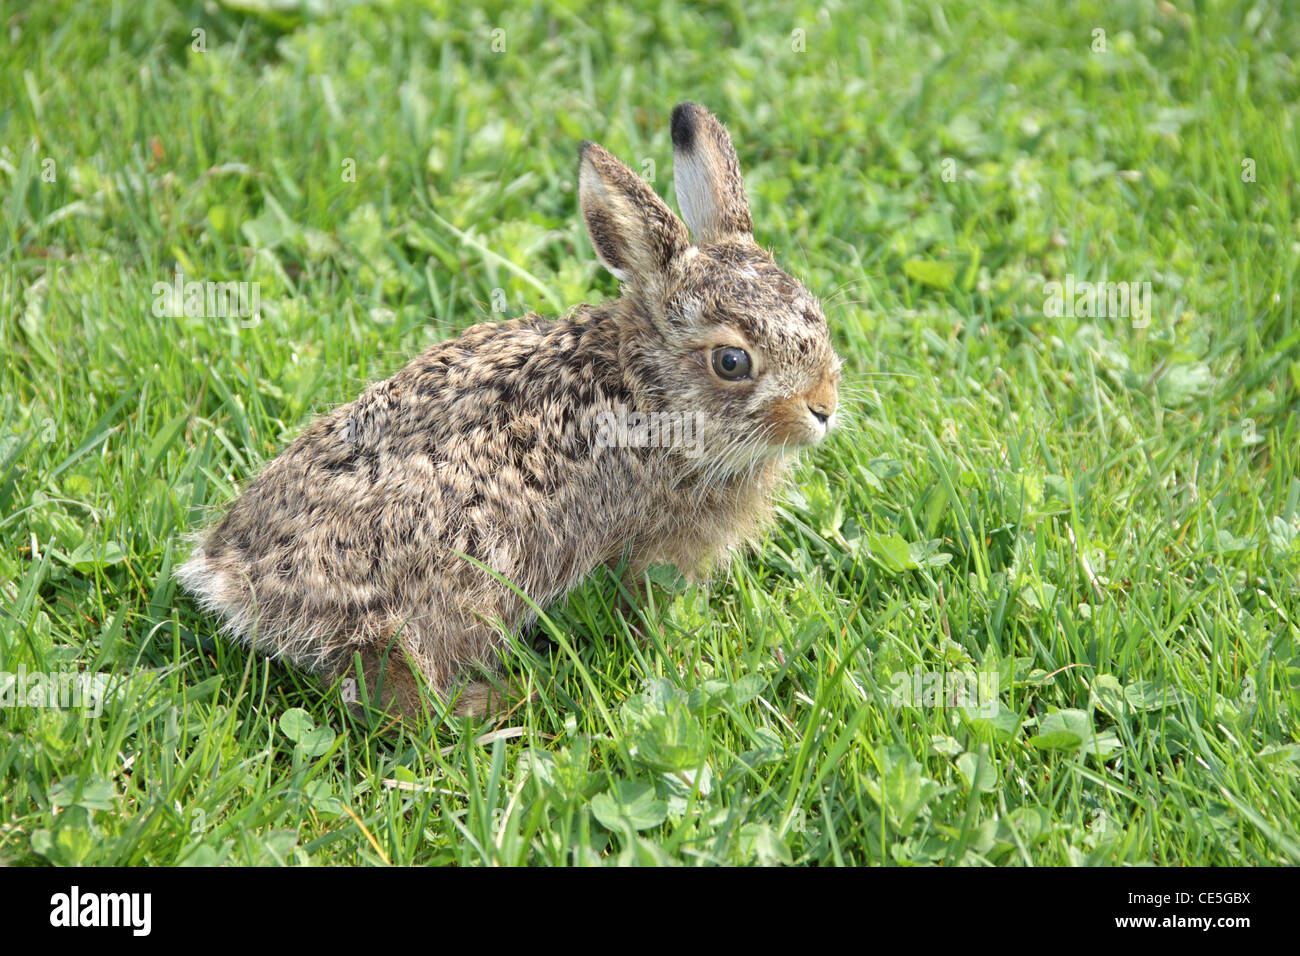 Small little hare sitting in the green grass Stock Photo